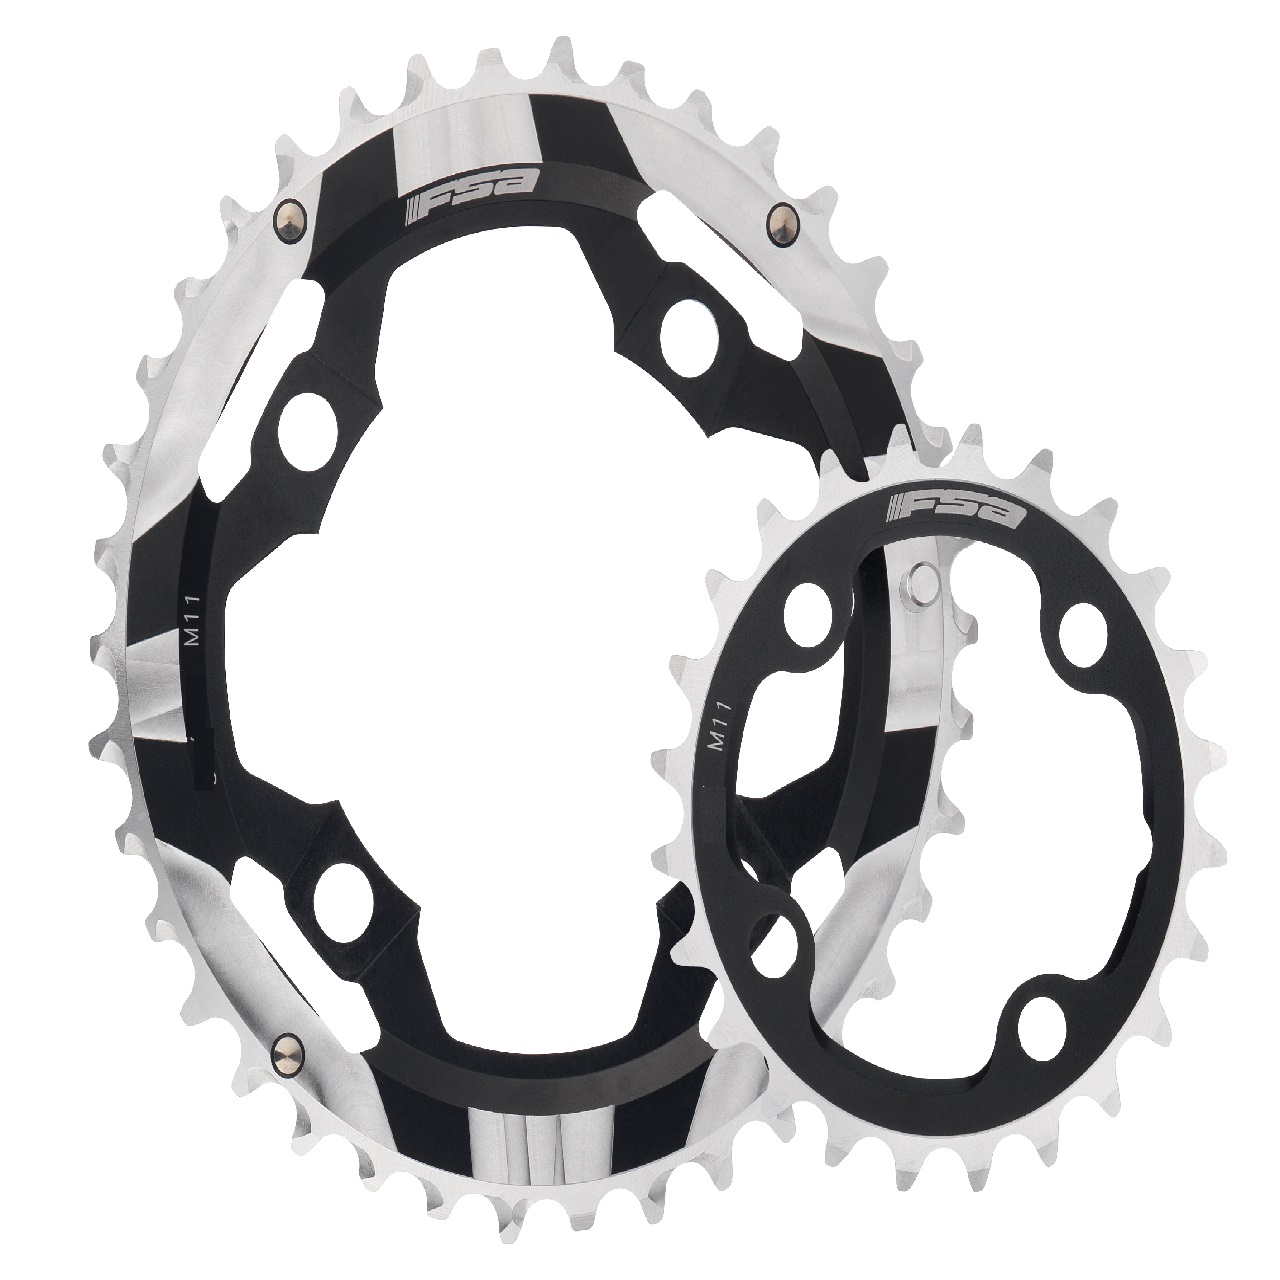 FSA K-Force ATB 4 Hole ABS Chainring for 2X Cranks 36T x 96 BCD (1 ring) WB329